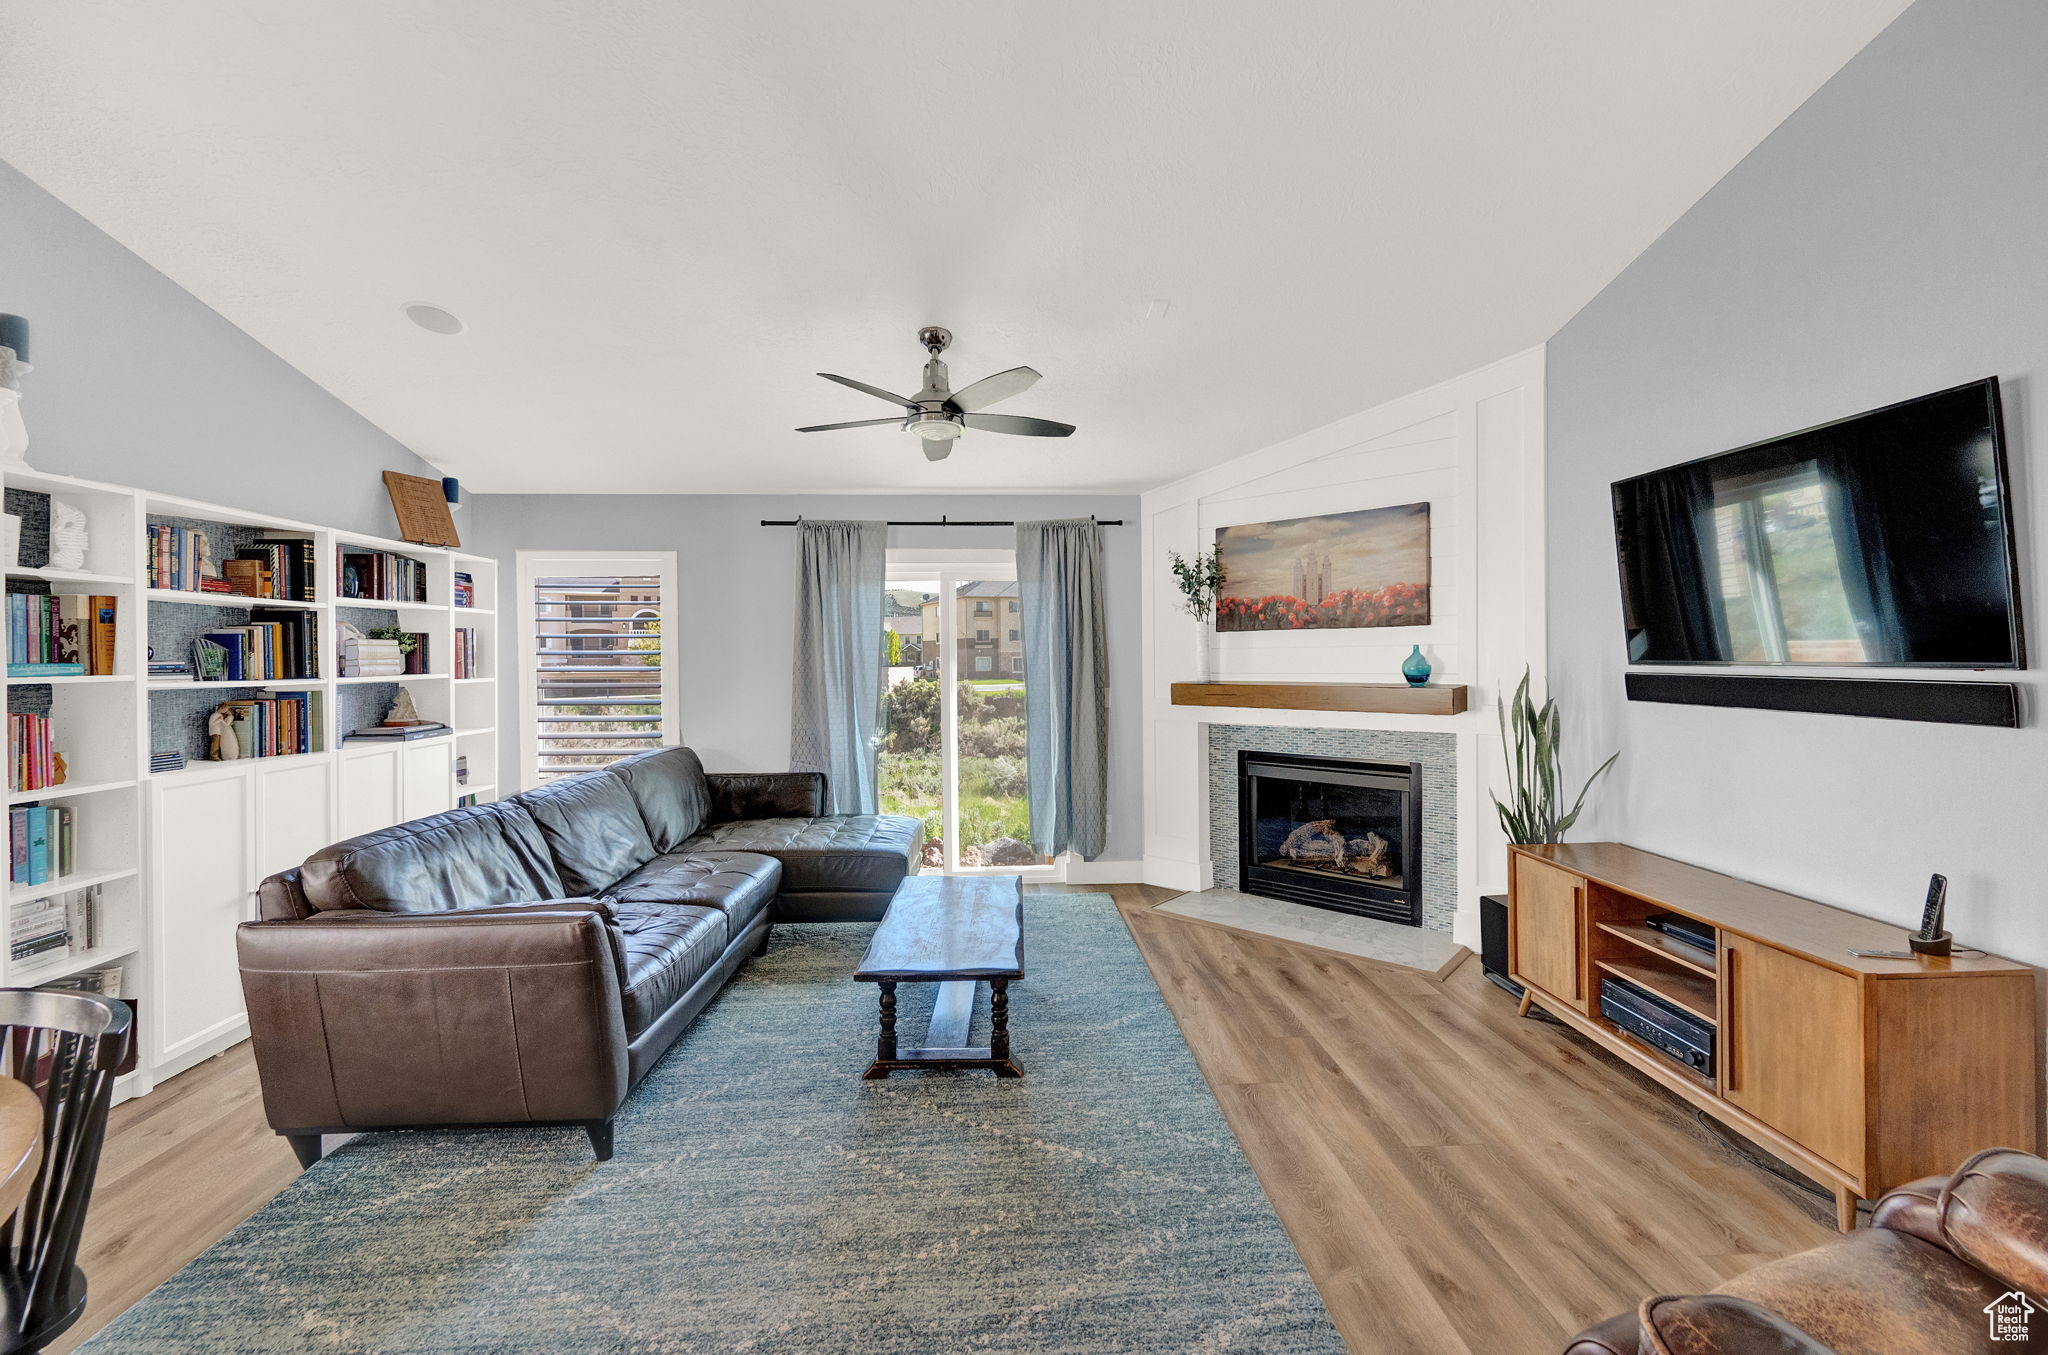 Living room featuring light hardwood / wood-style floors, ceiling fan, and lofted ceiling